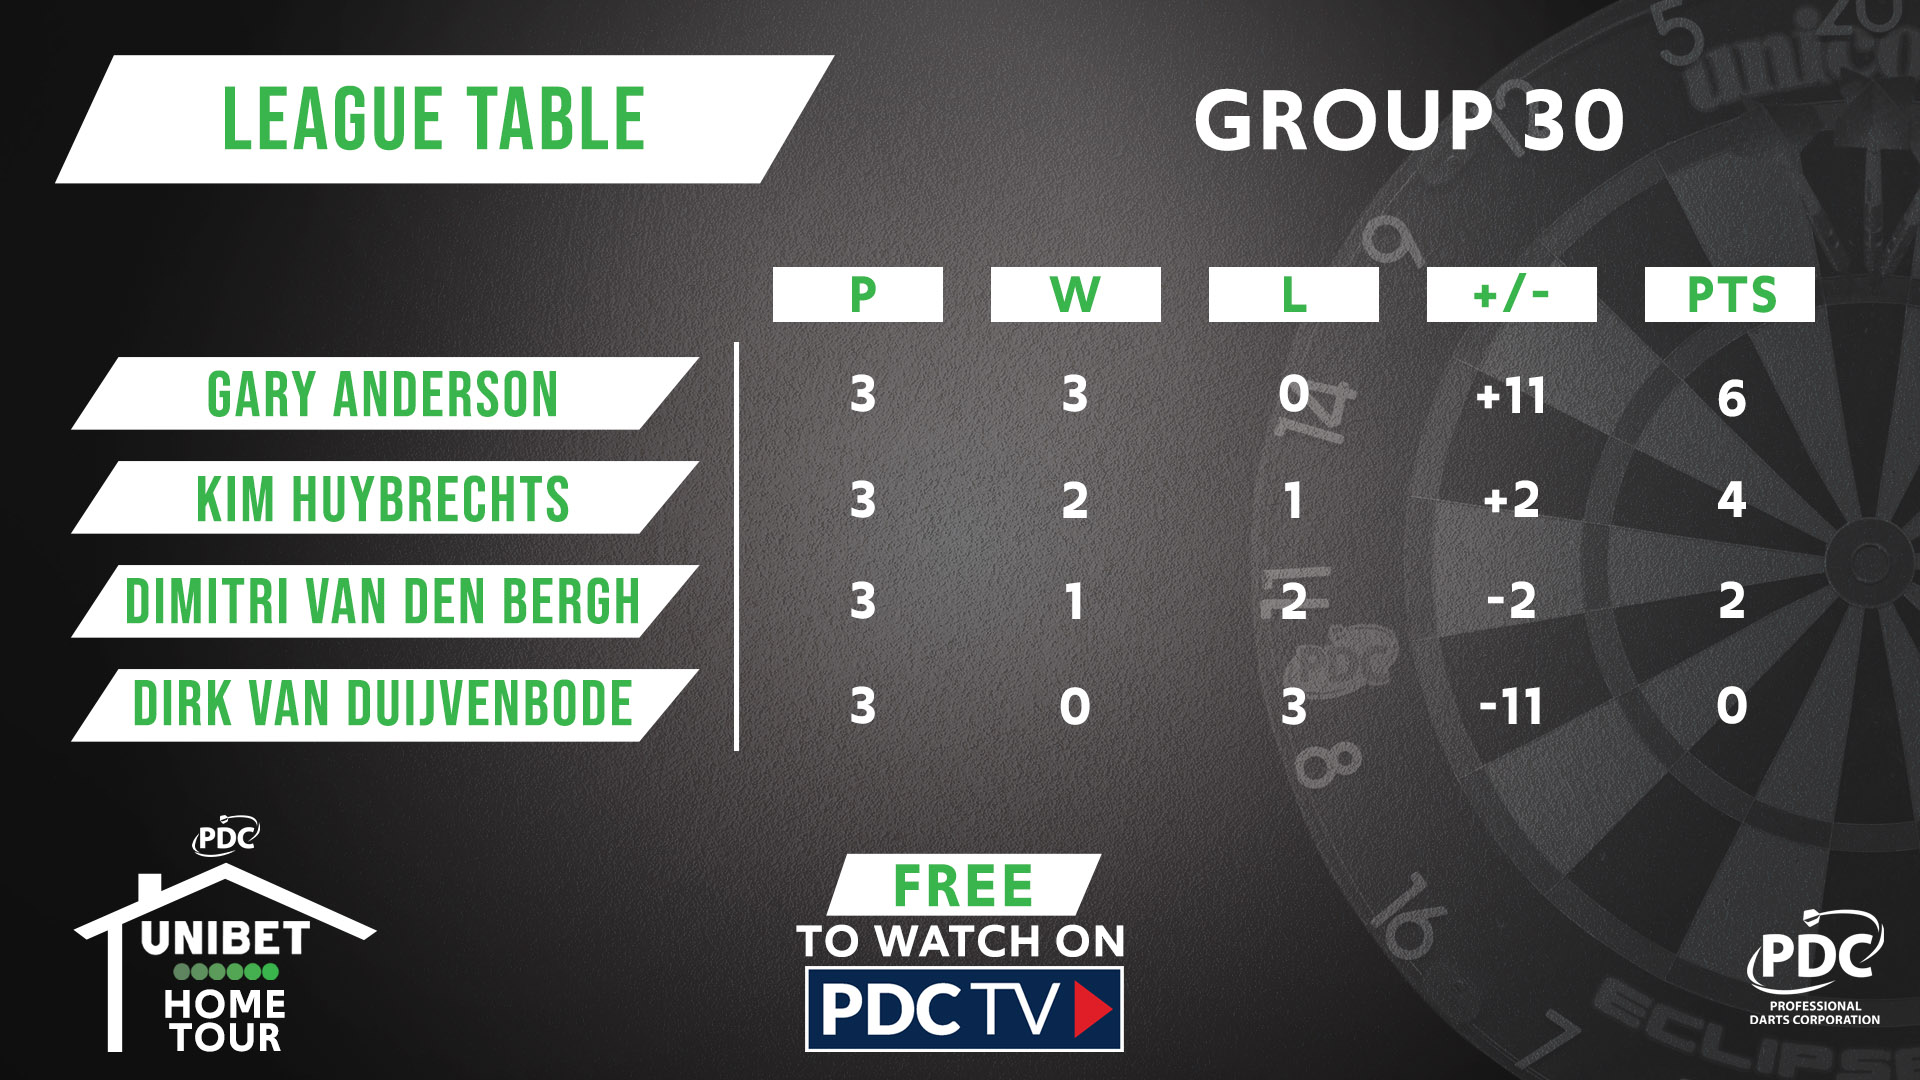 Group 30 table